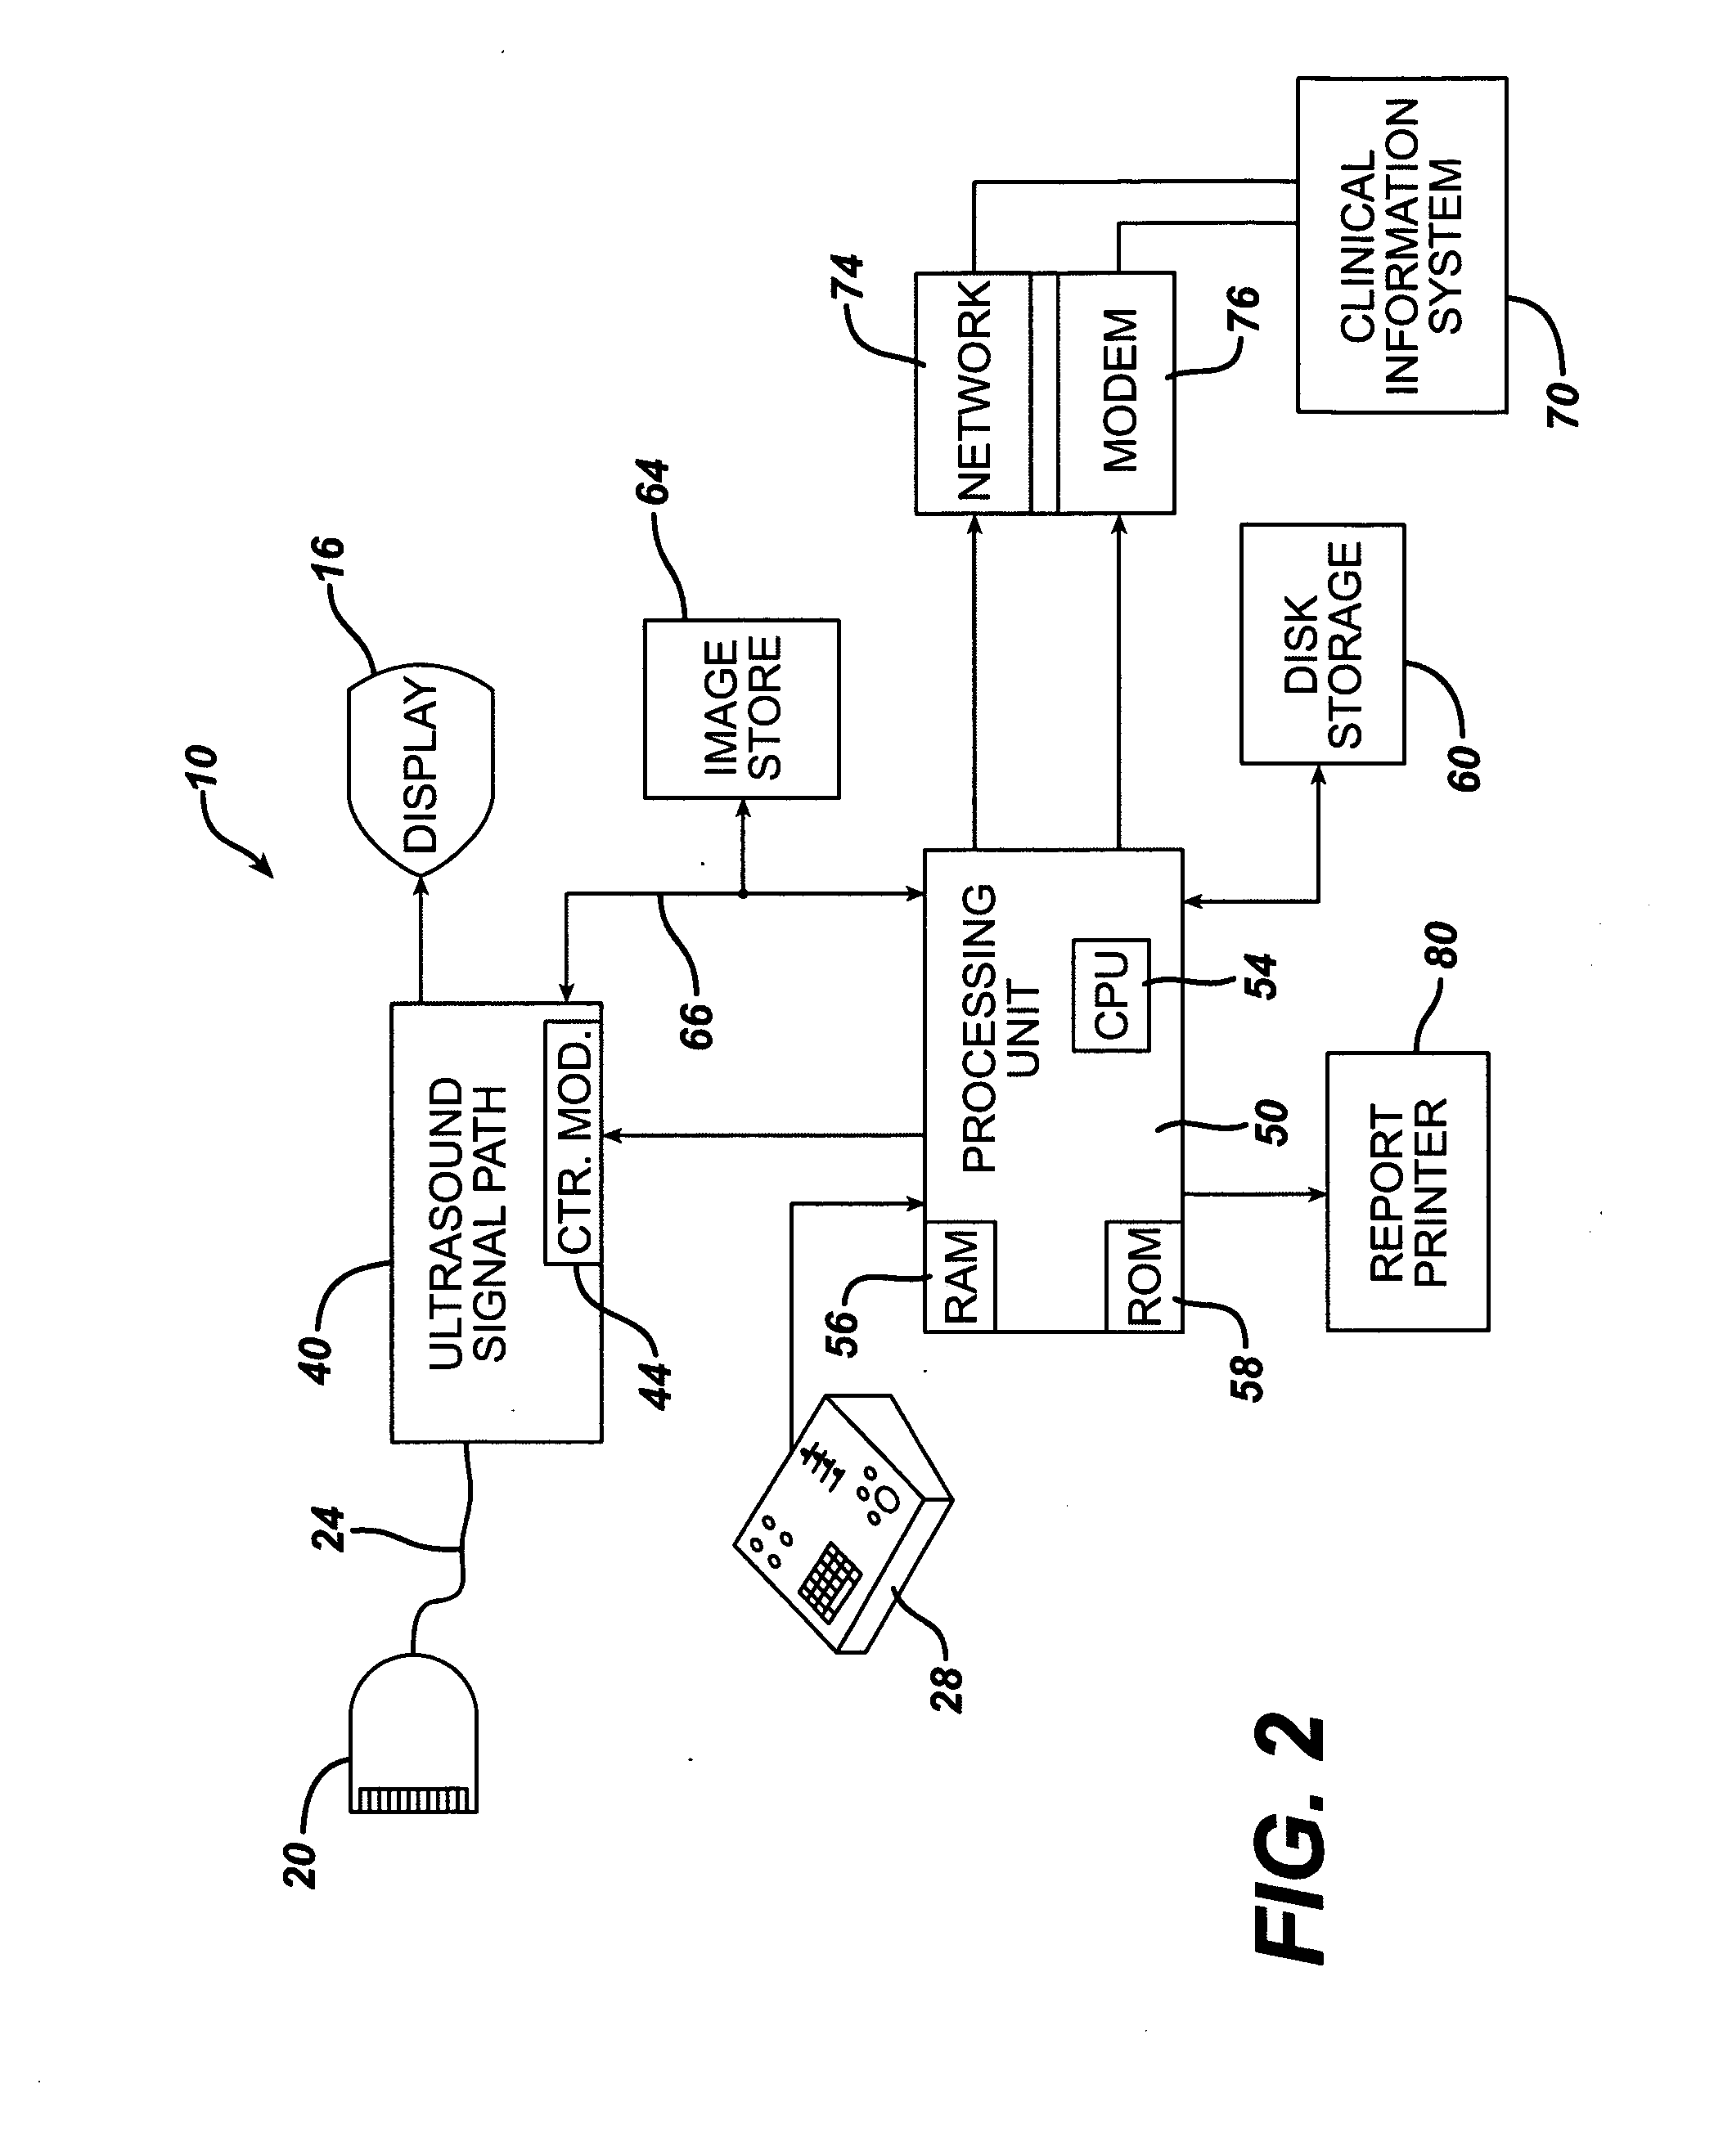 System and method for using scheduled protocol codes to automatically configure ultrasound imaging systems